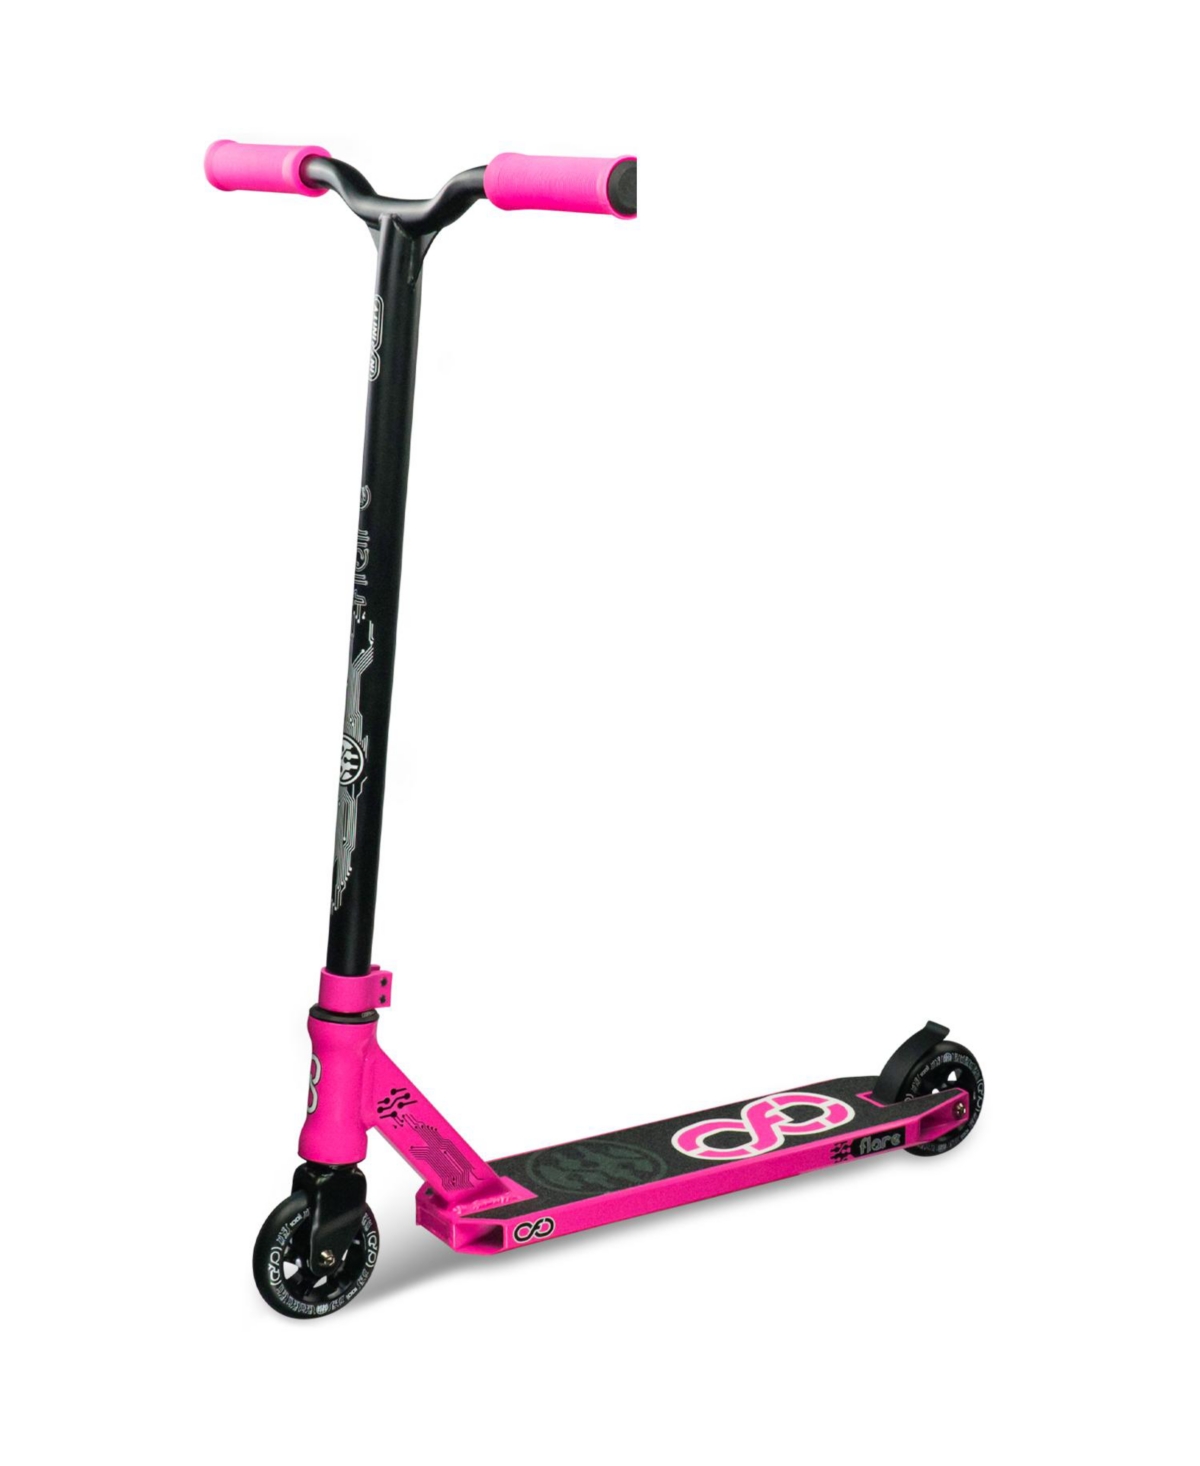 Flare Kick Scooter By Fun Trick Scooters For Stunts On The Street And Skate Park - Pink